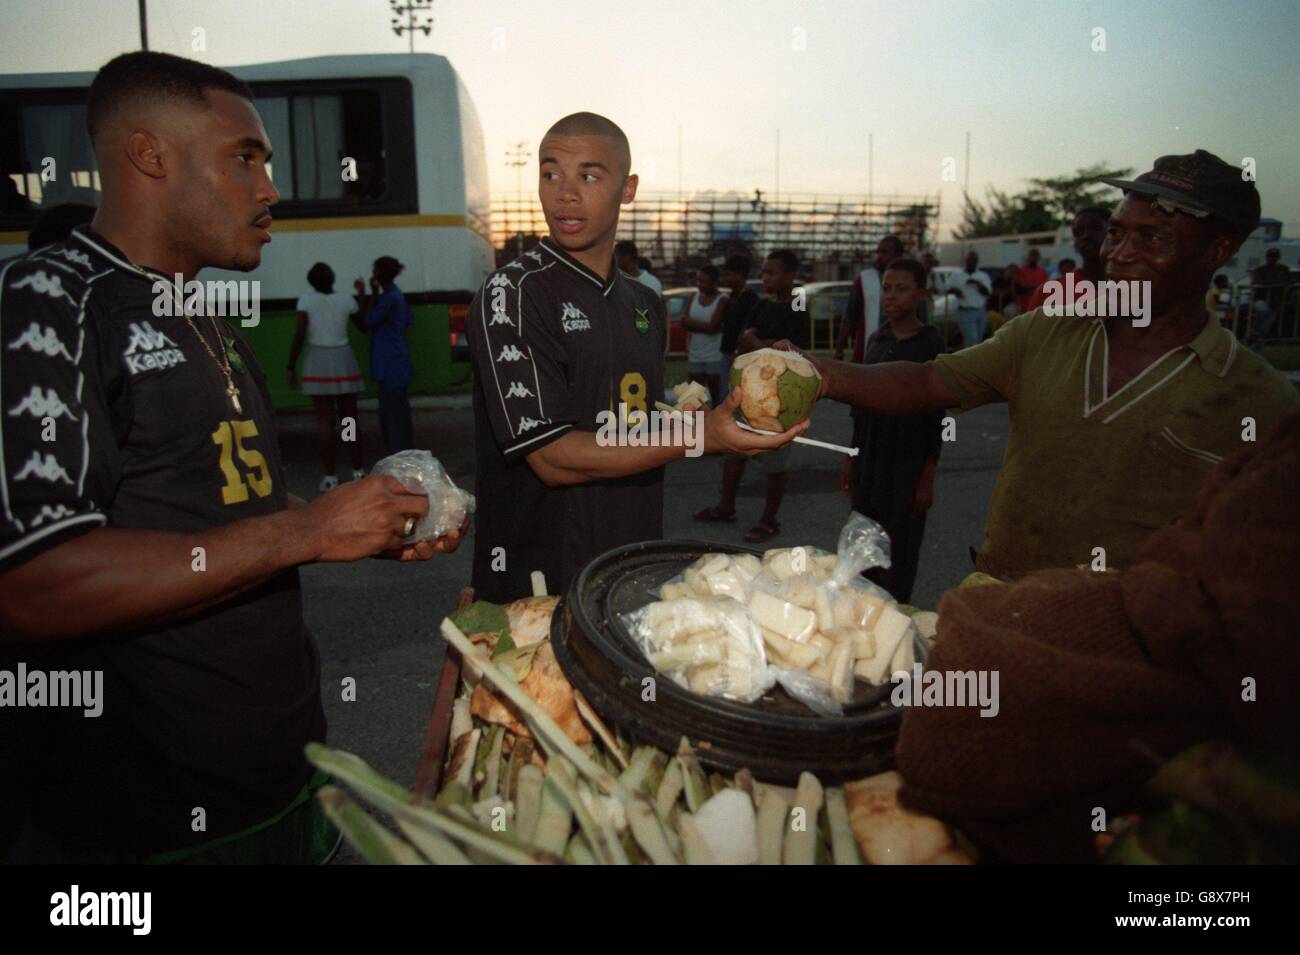 Soccer - World Cup Qualifier - Jamaica v Mexico. Jamaica's Deon Burton (centre) buys a coconut before the game Stock Photo